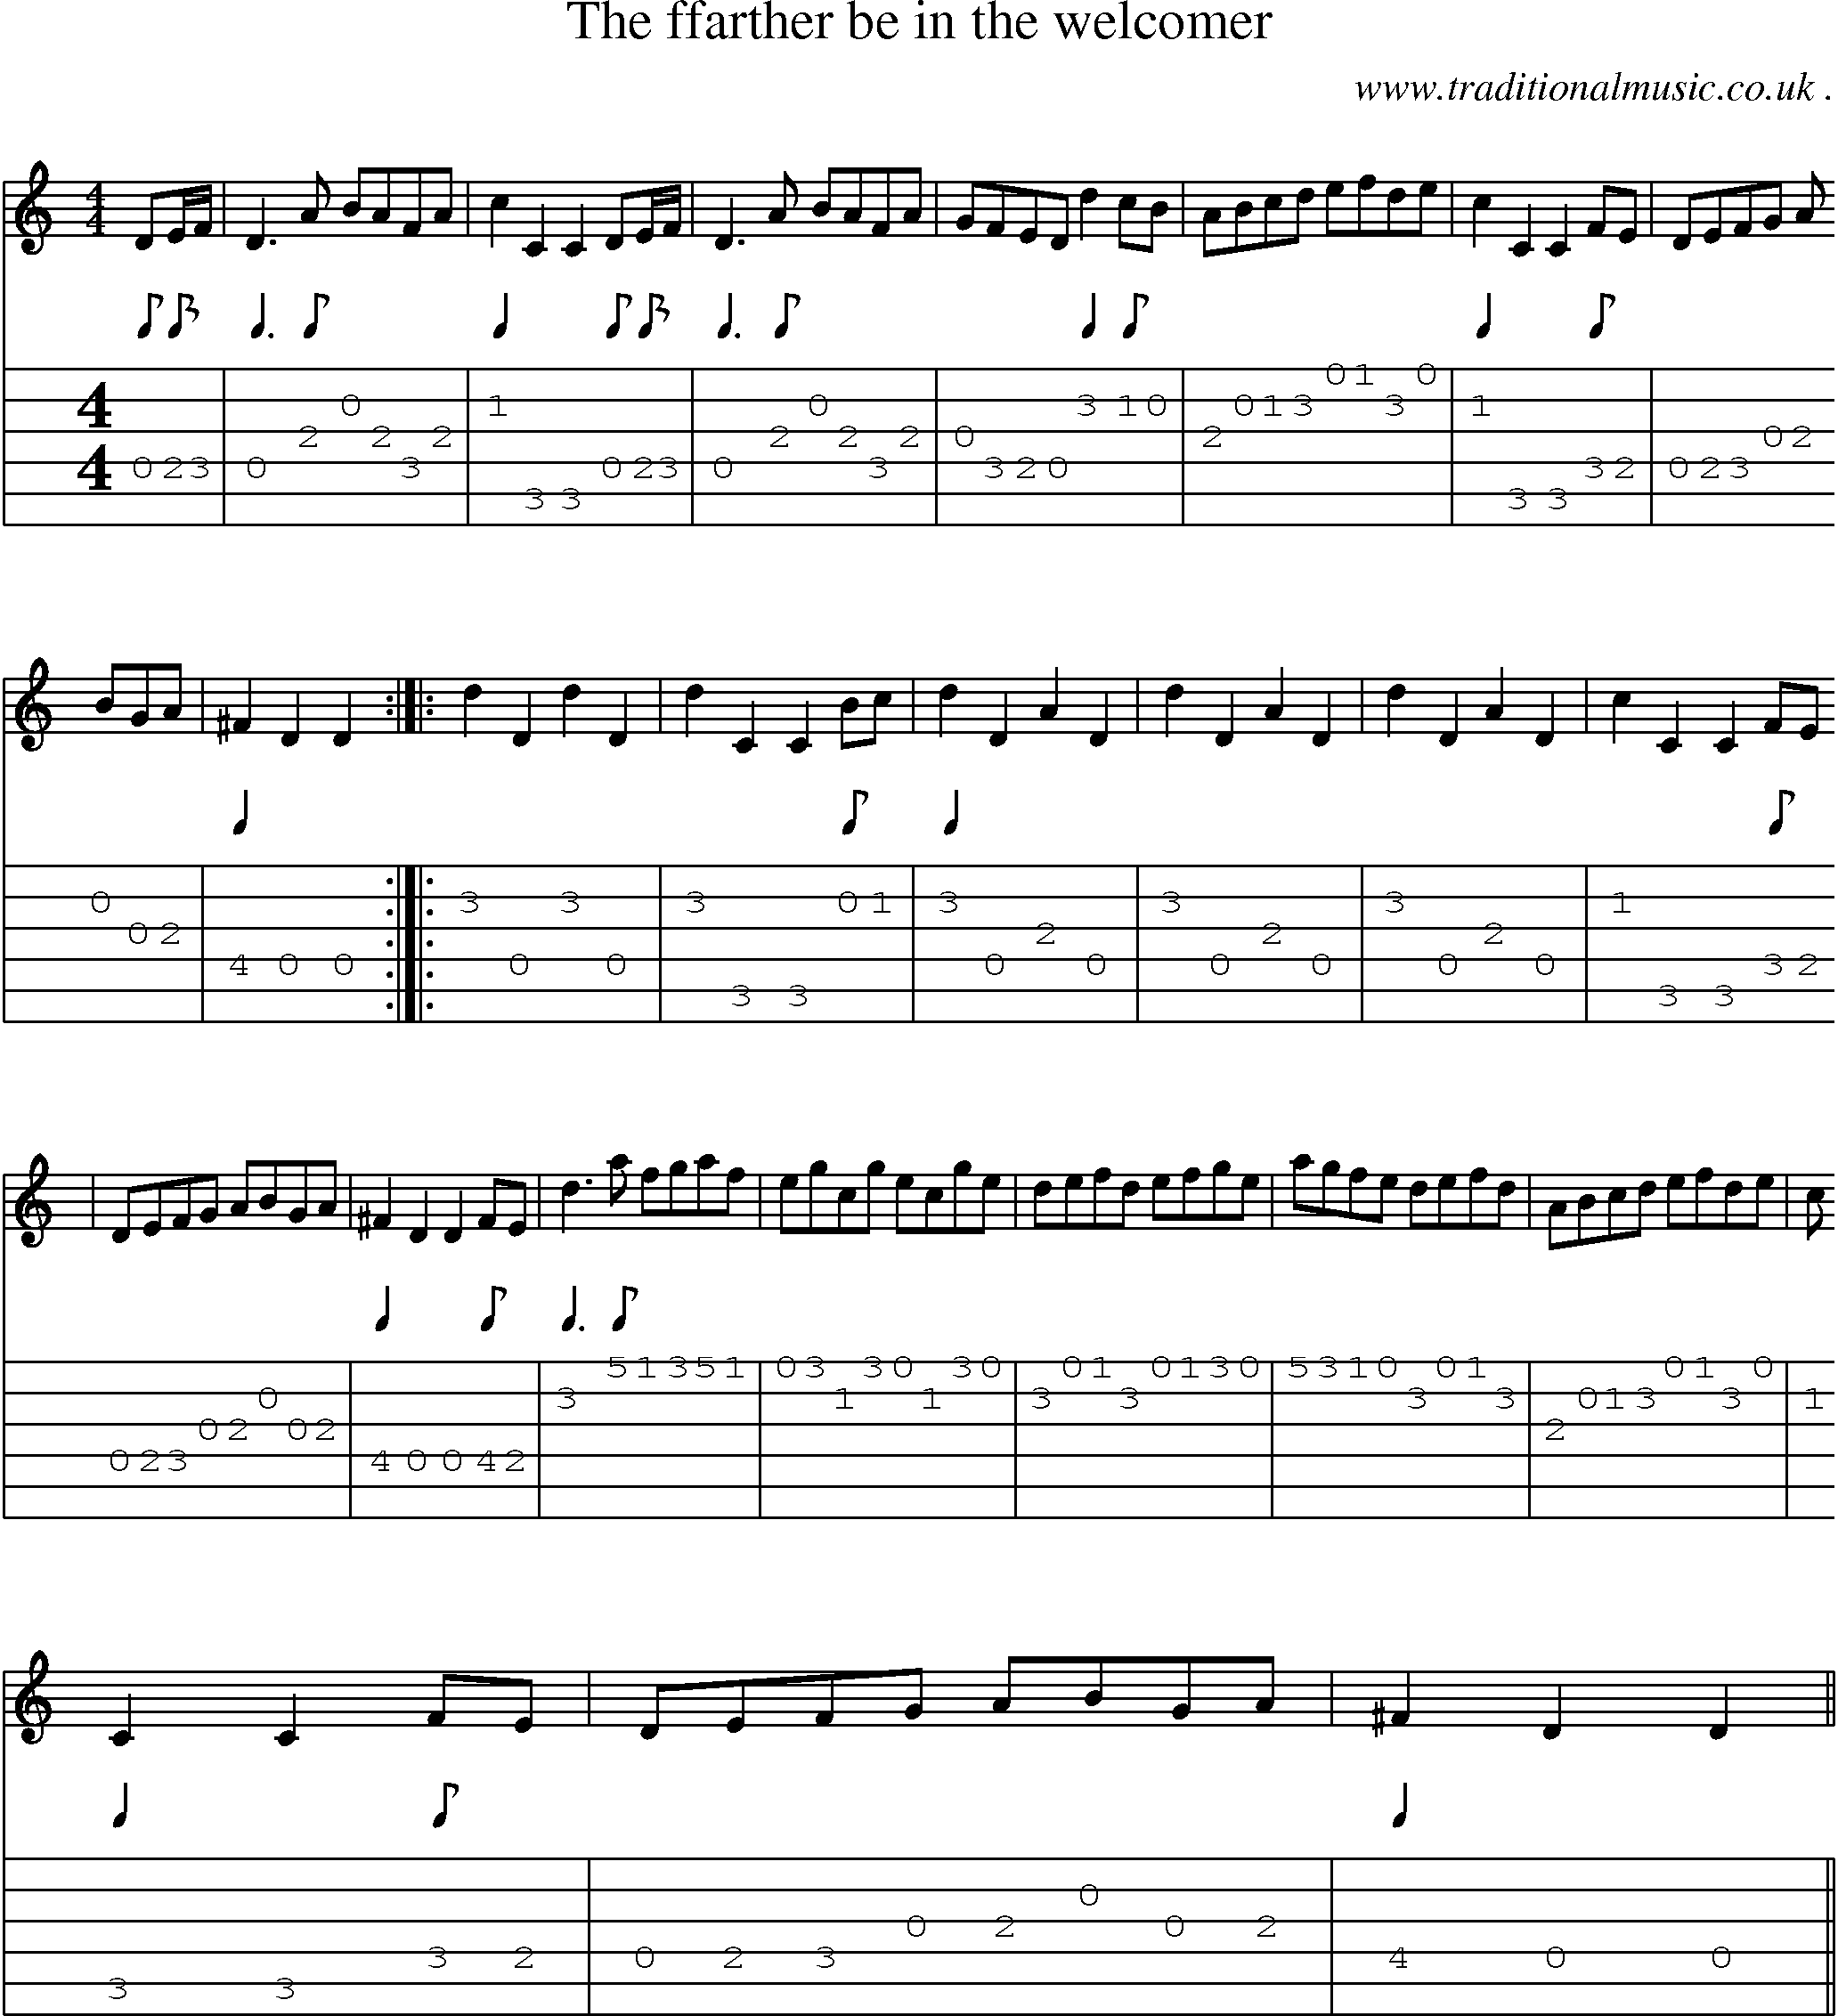 Sheet-Music and Guitar Tabs for The Ffarther Be In The Welcomer